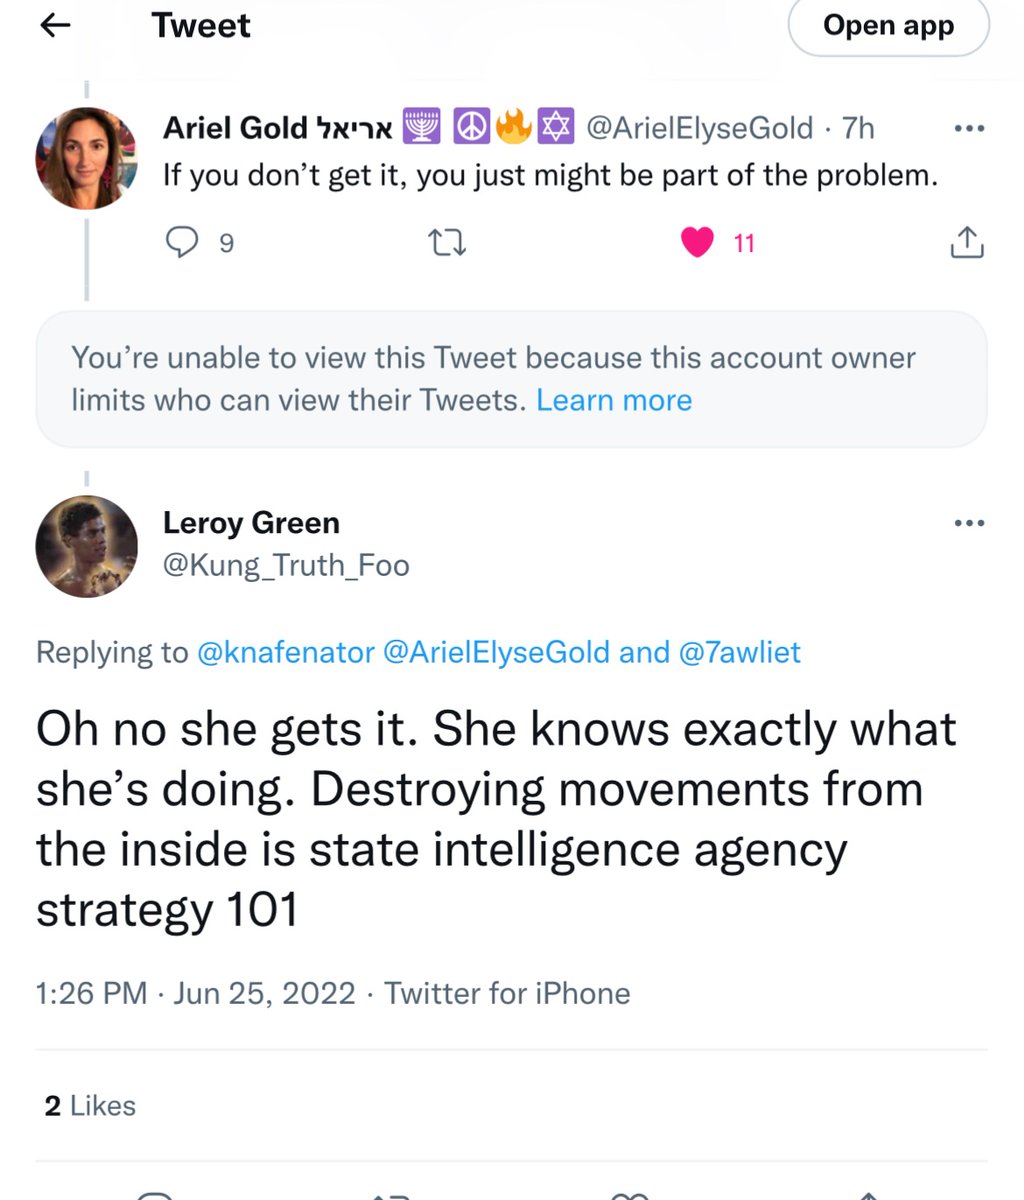 There’s finally an anti-Jewish line Ariel seems not to want to cross. Her previous cohorts reprimanded her as “endangering Palestinian Organizations,” for criticizing the Mapping Project’s hit list. Twisted. Yes-I ❤️ @ArielElyseGold tweet. Who wouida thunk that’d ever happen?